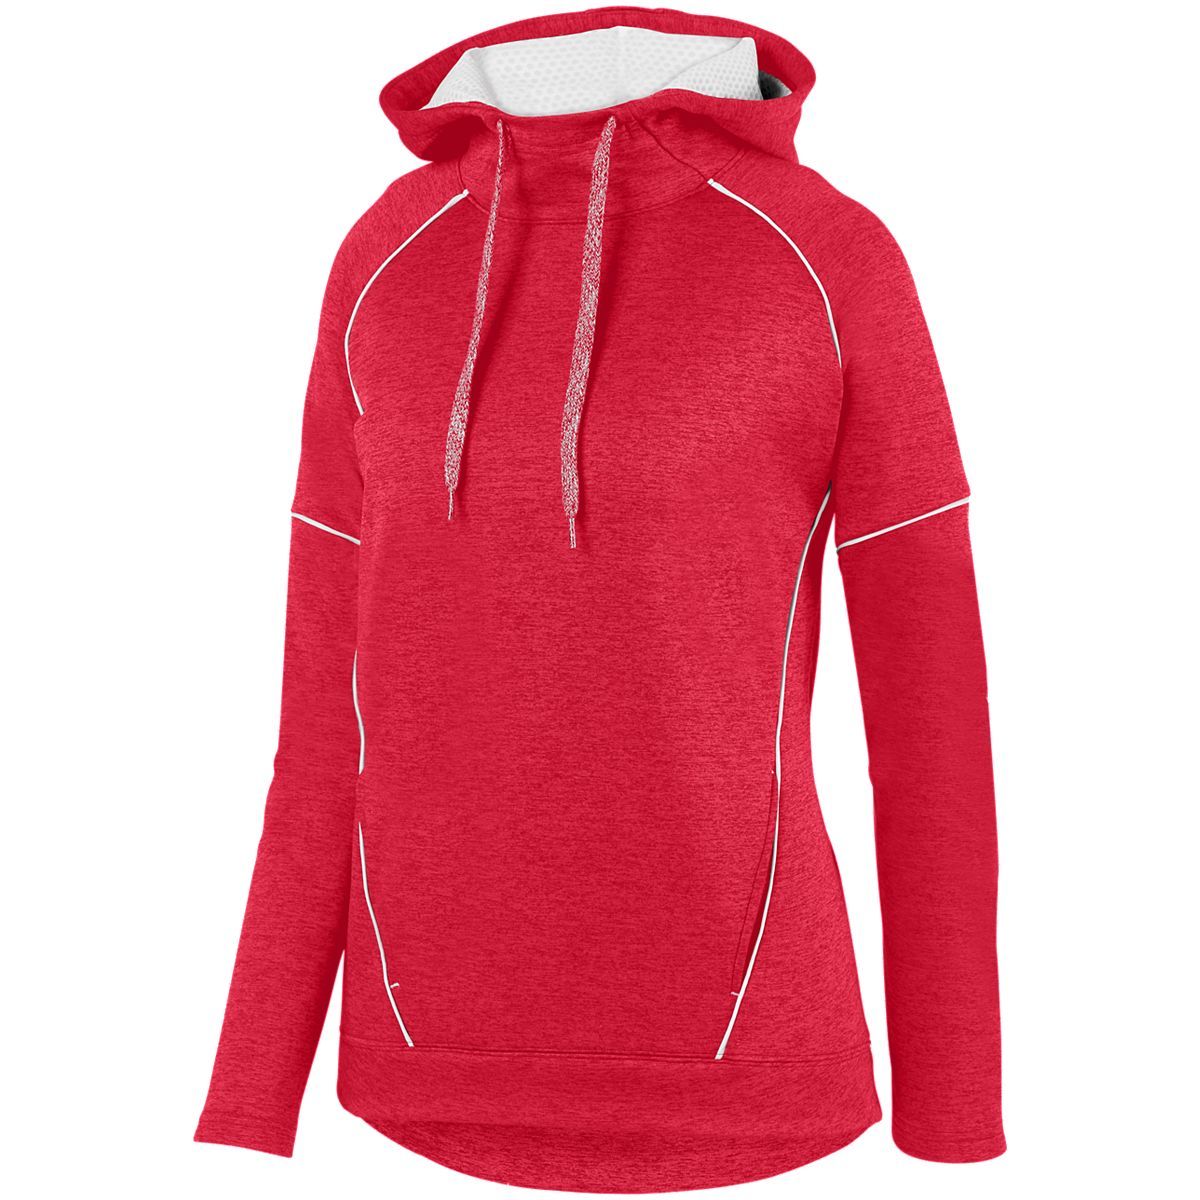 Augusta Sportswear Ladies Zoe Tonal Heather Hoodie in Red/White  -Part of the Ladies, Augusta-Products, Shirts, Tonal-Fleece-Collection product lines at KanaleyCreations.com